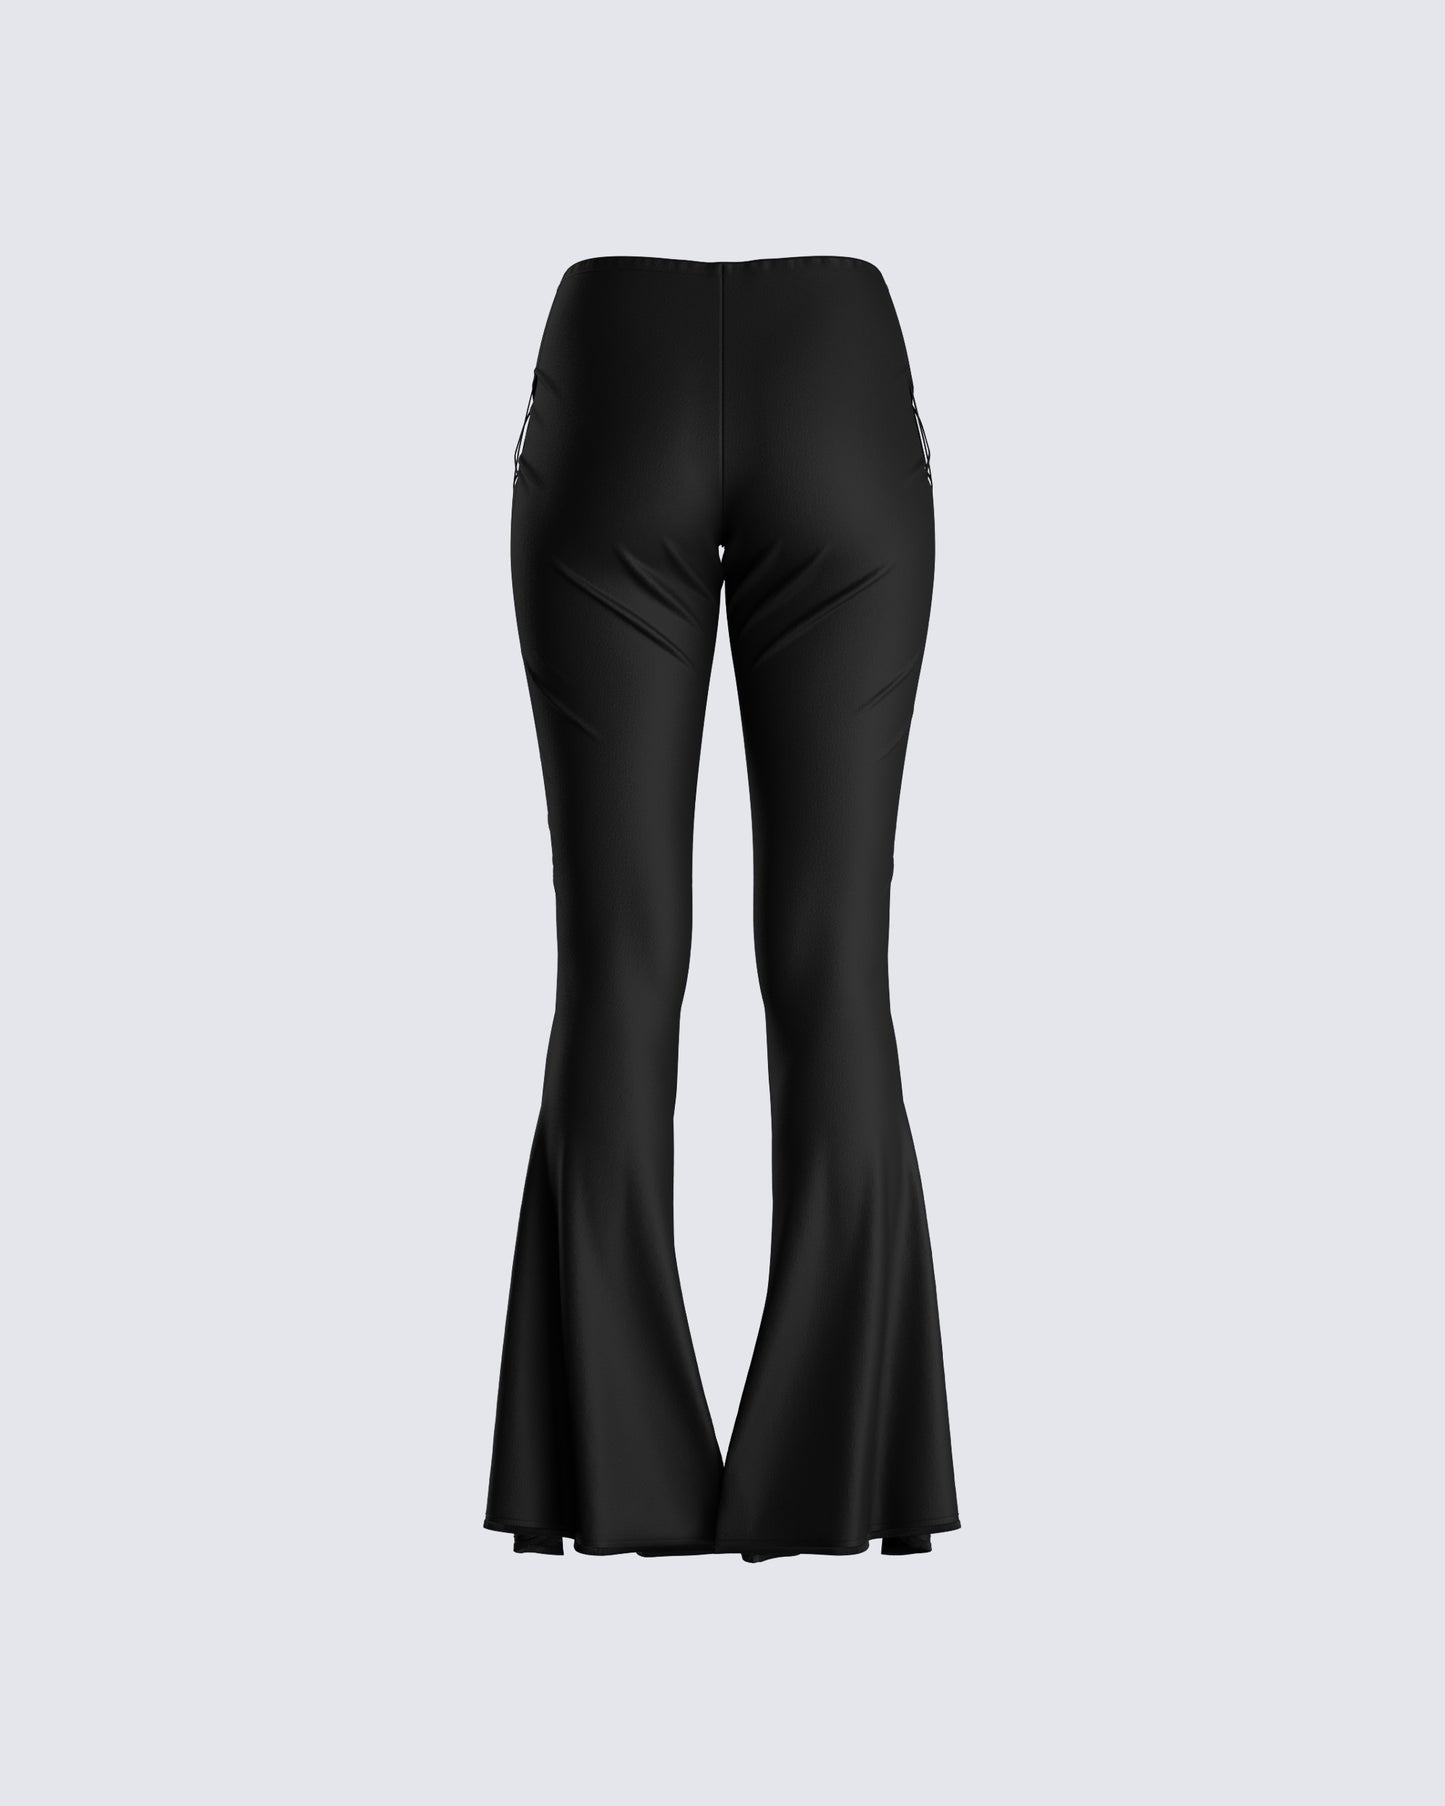 Hot Topic Social Collision Black Buckle Lace-Up Flare Pants